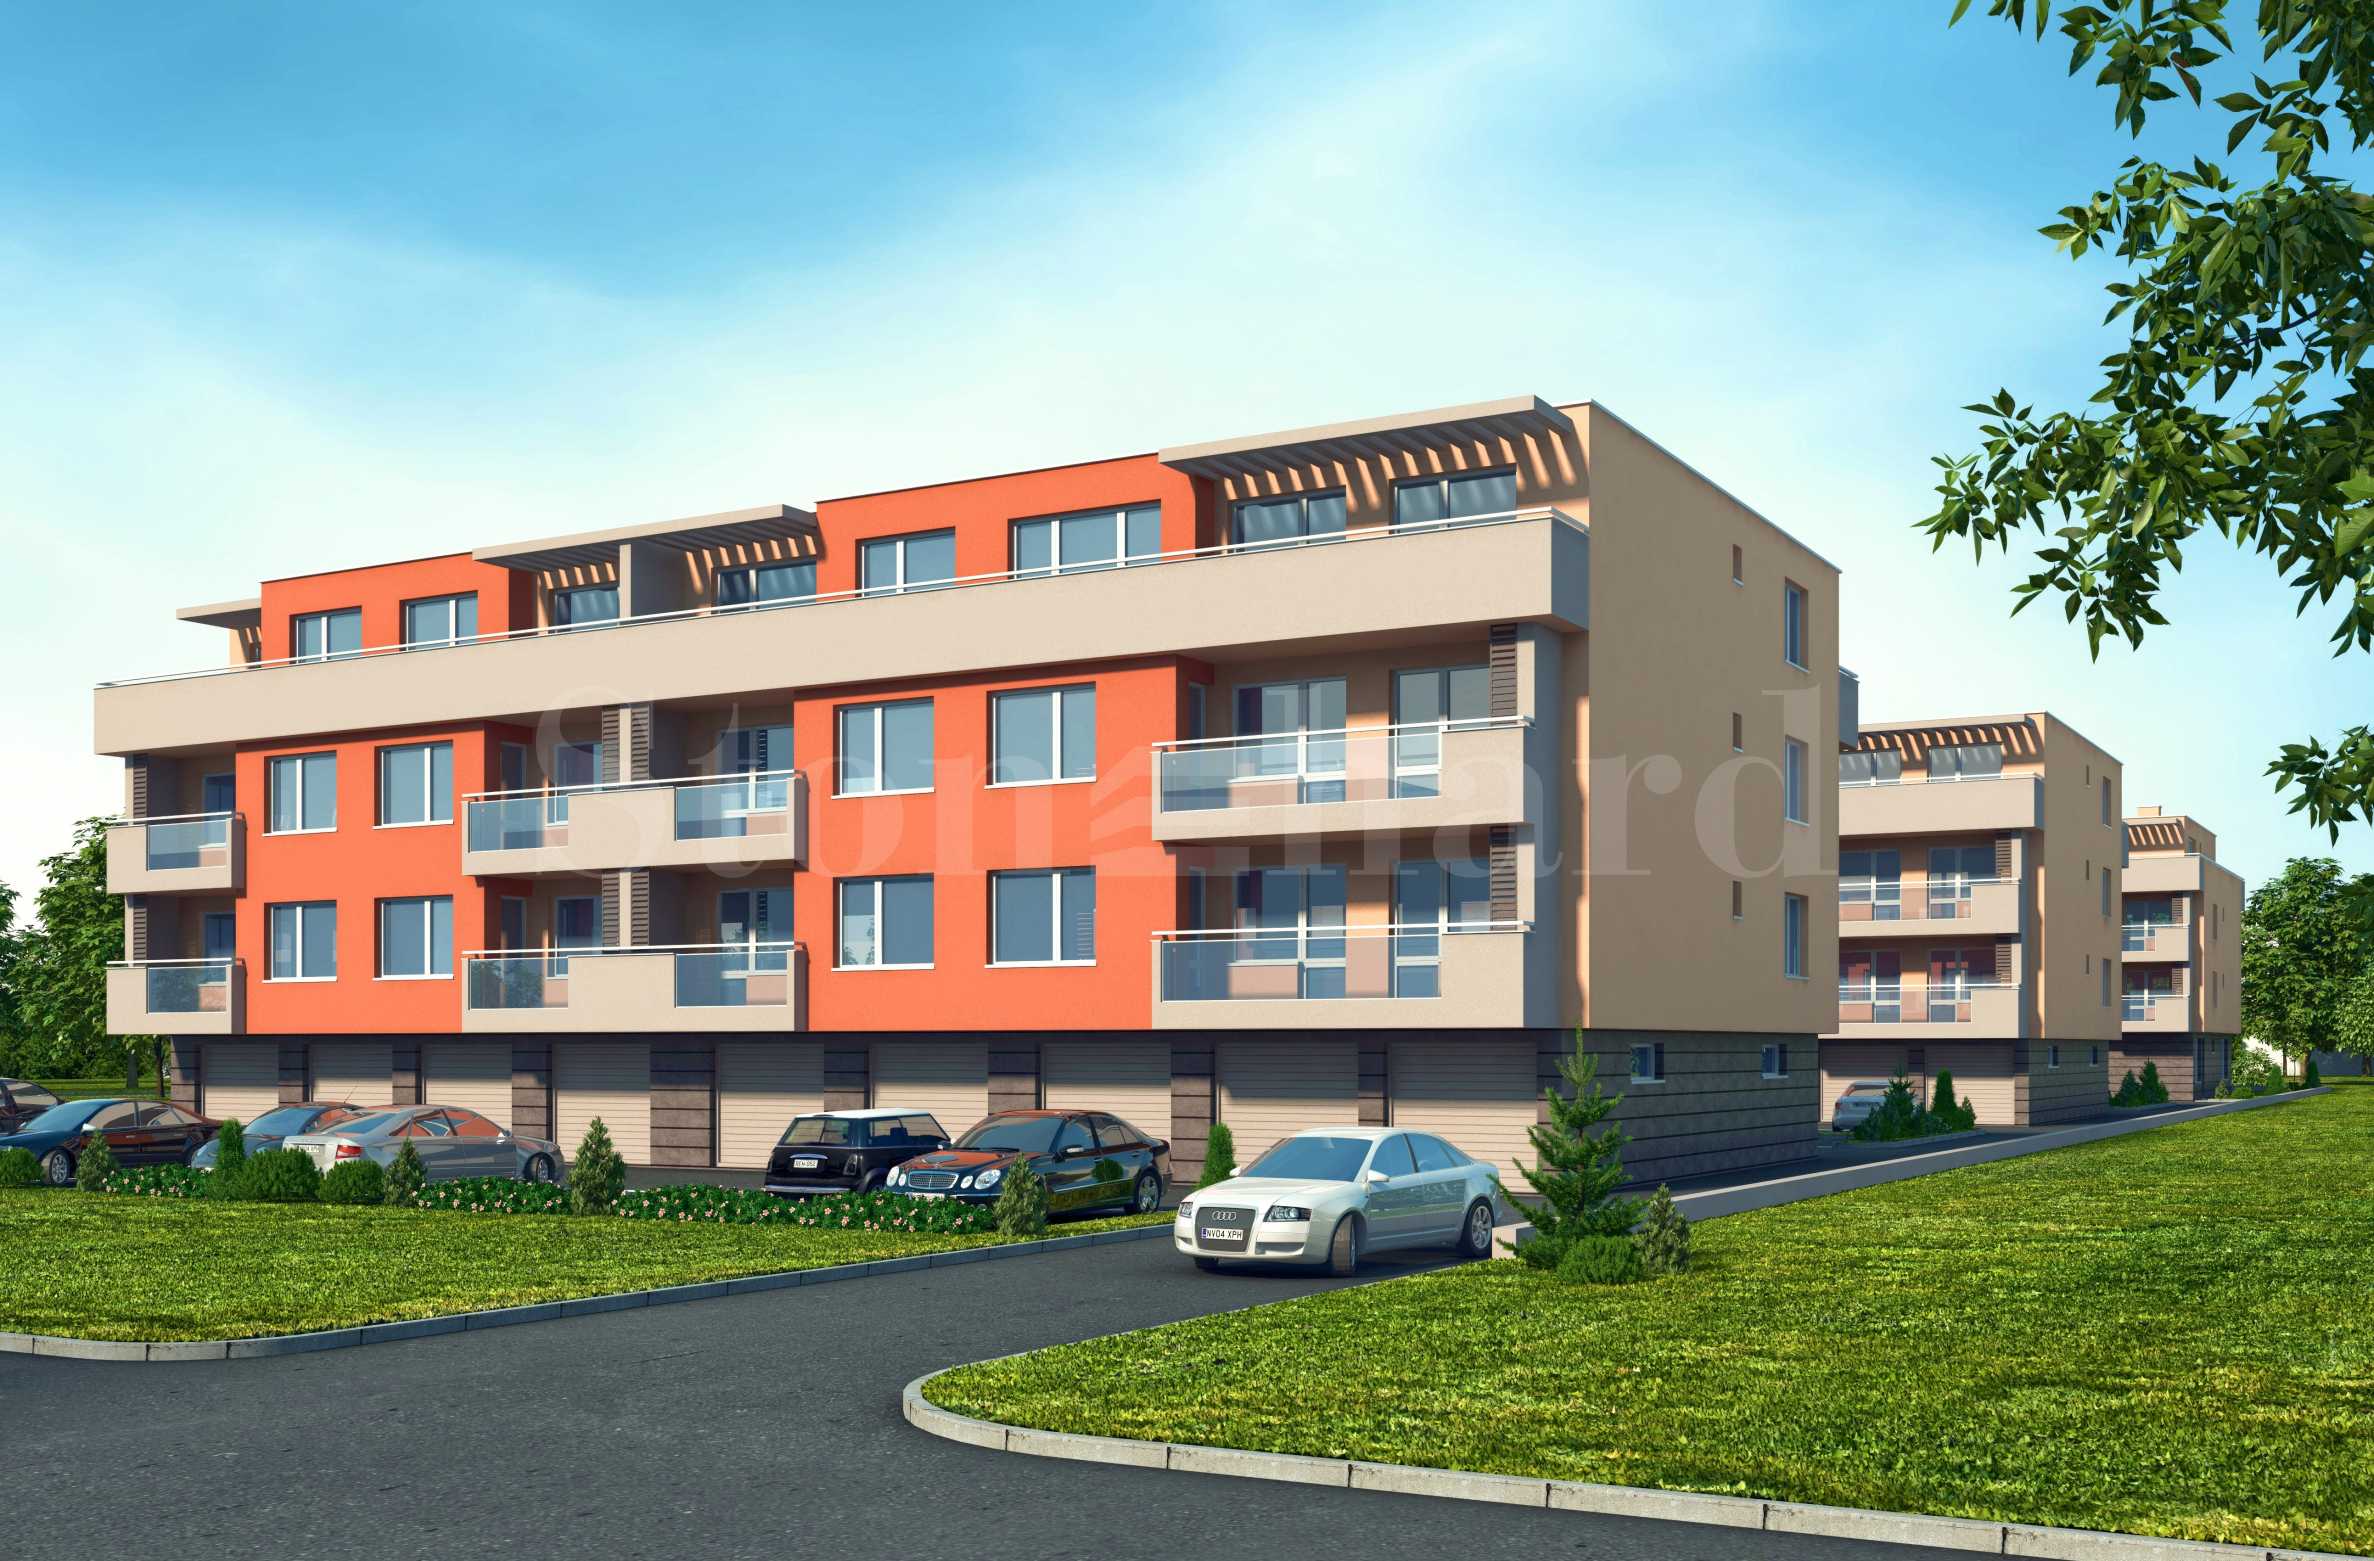 Apartments at attractive prices in a new project in the southern part of the city of Plovdiv1 - Stonehard